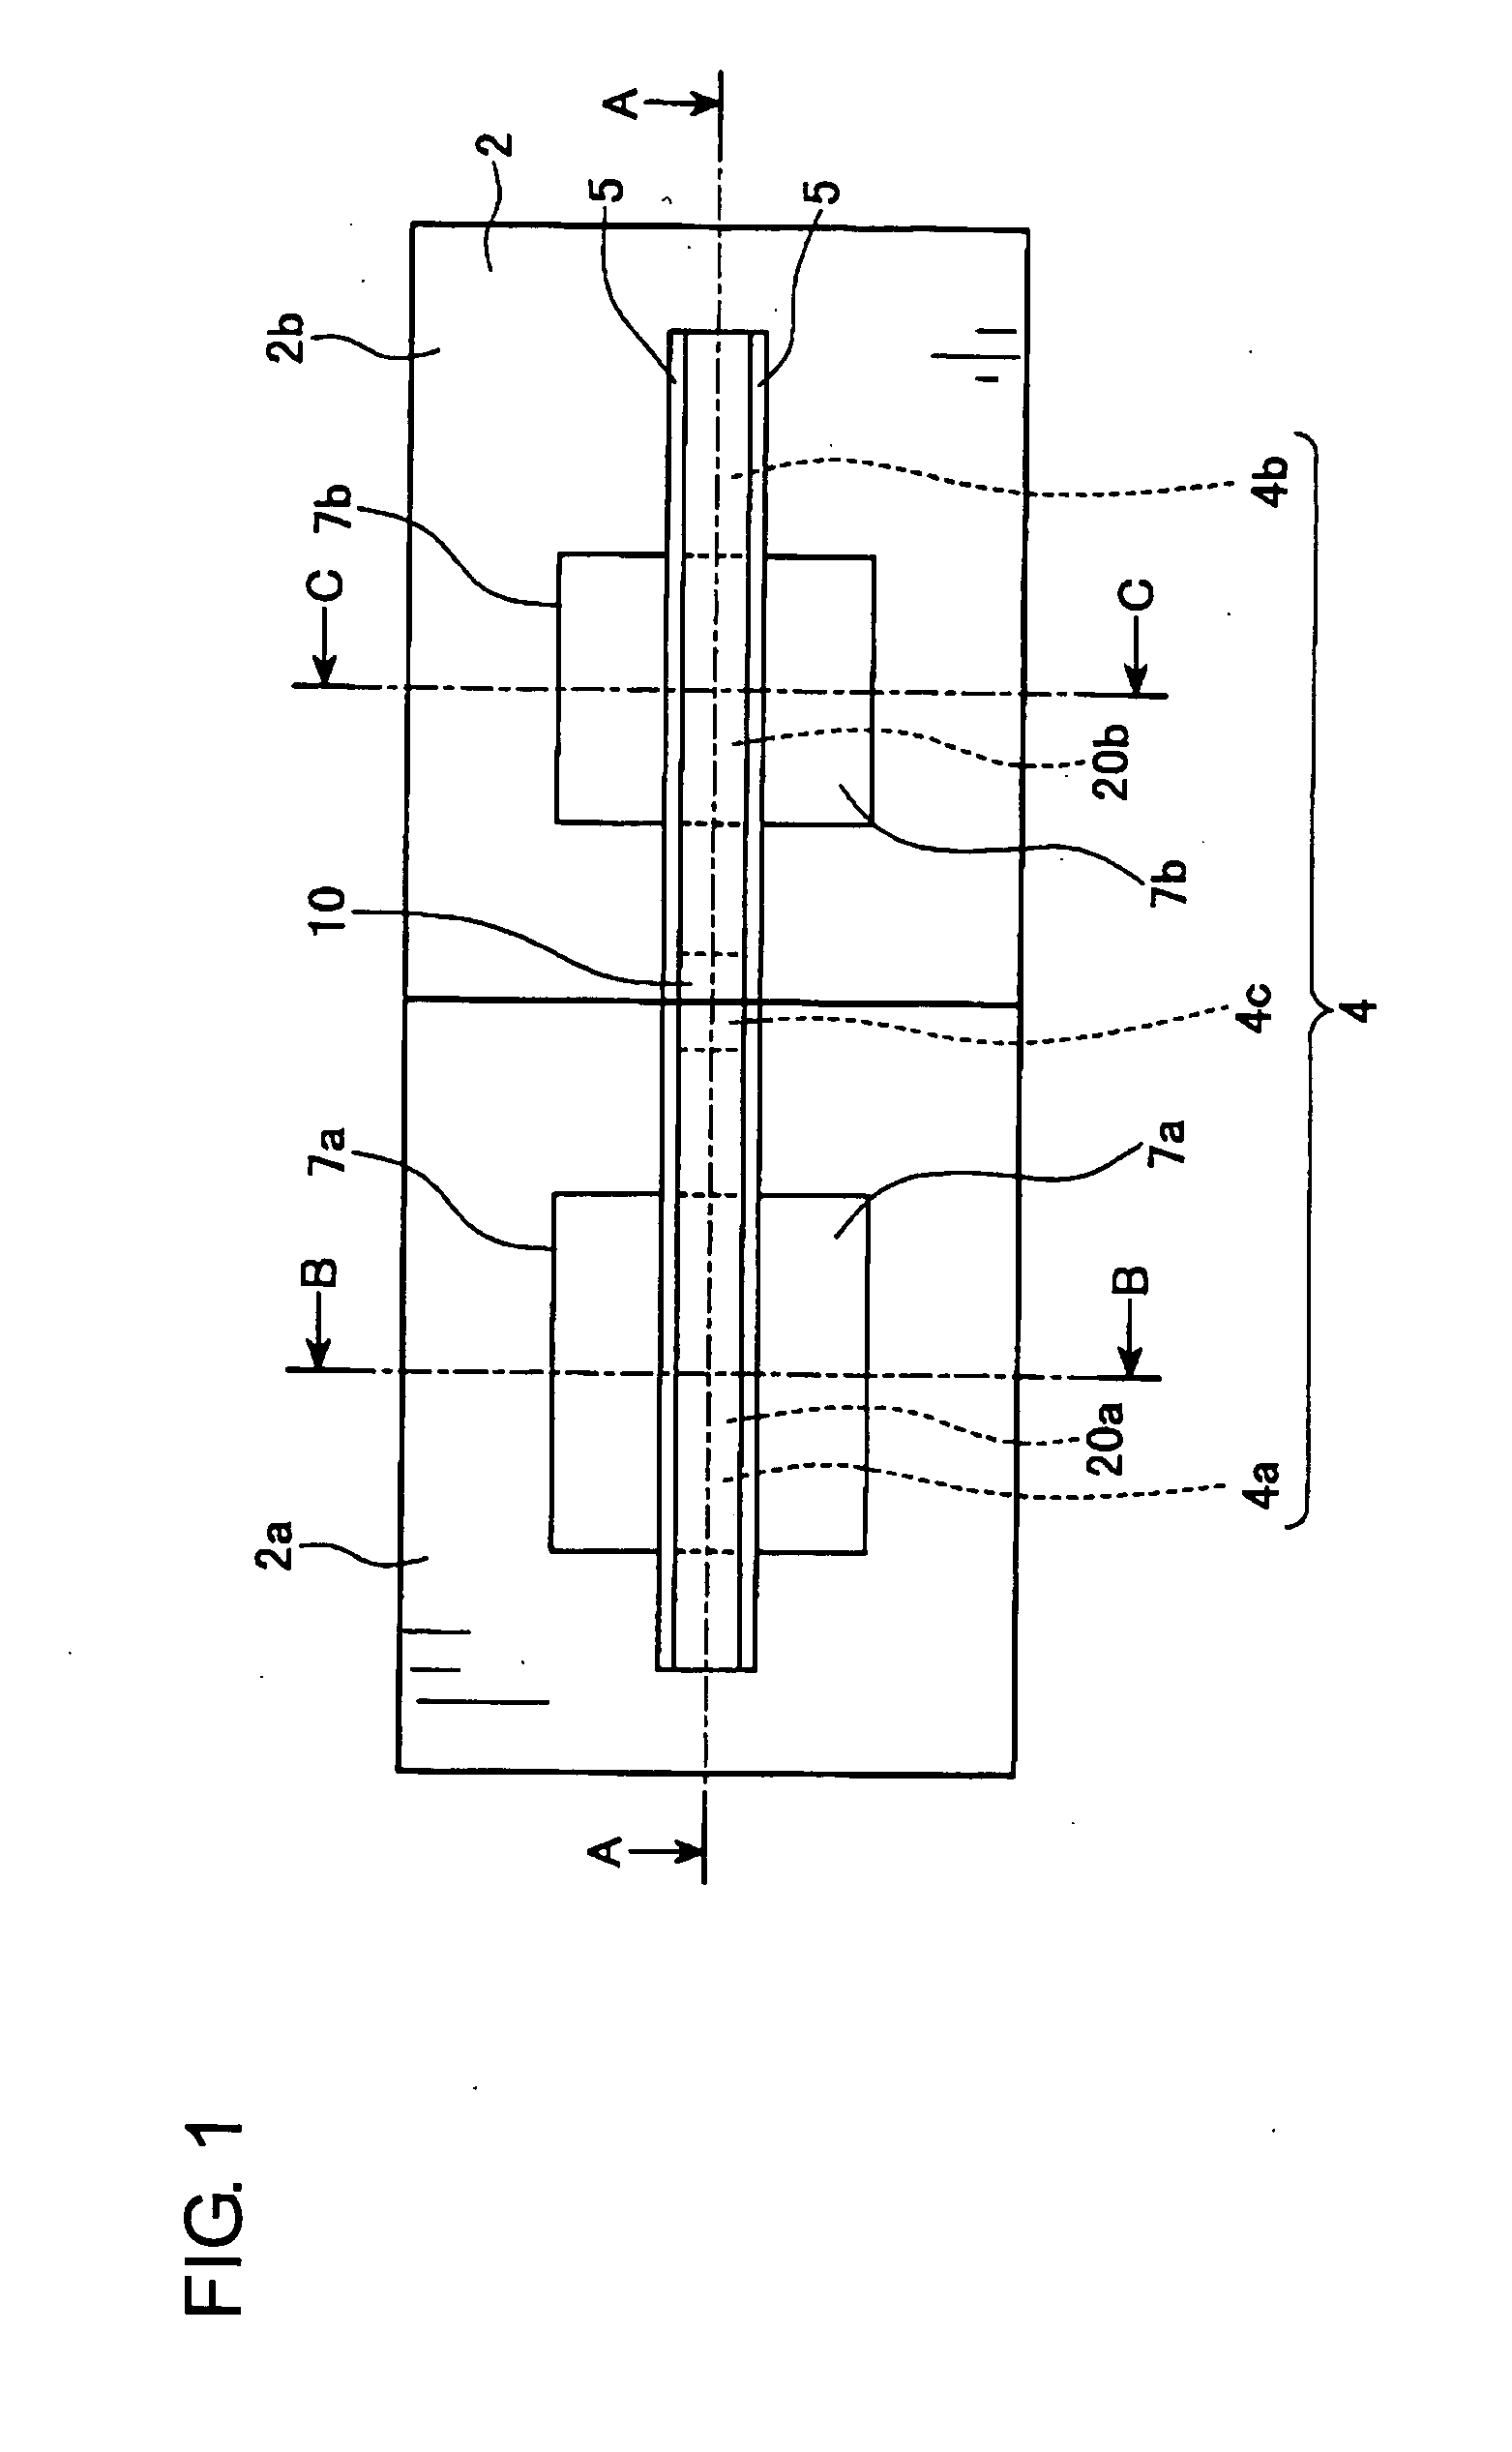 Semiconductor device with a gate region having overlapping first conduction type and second conduction type dopants